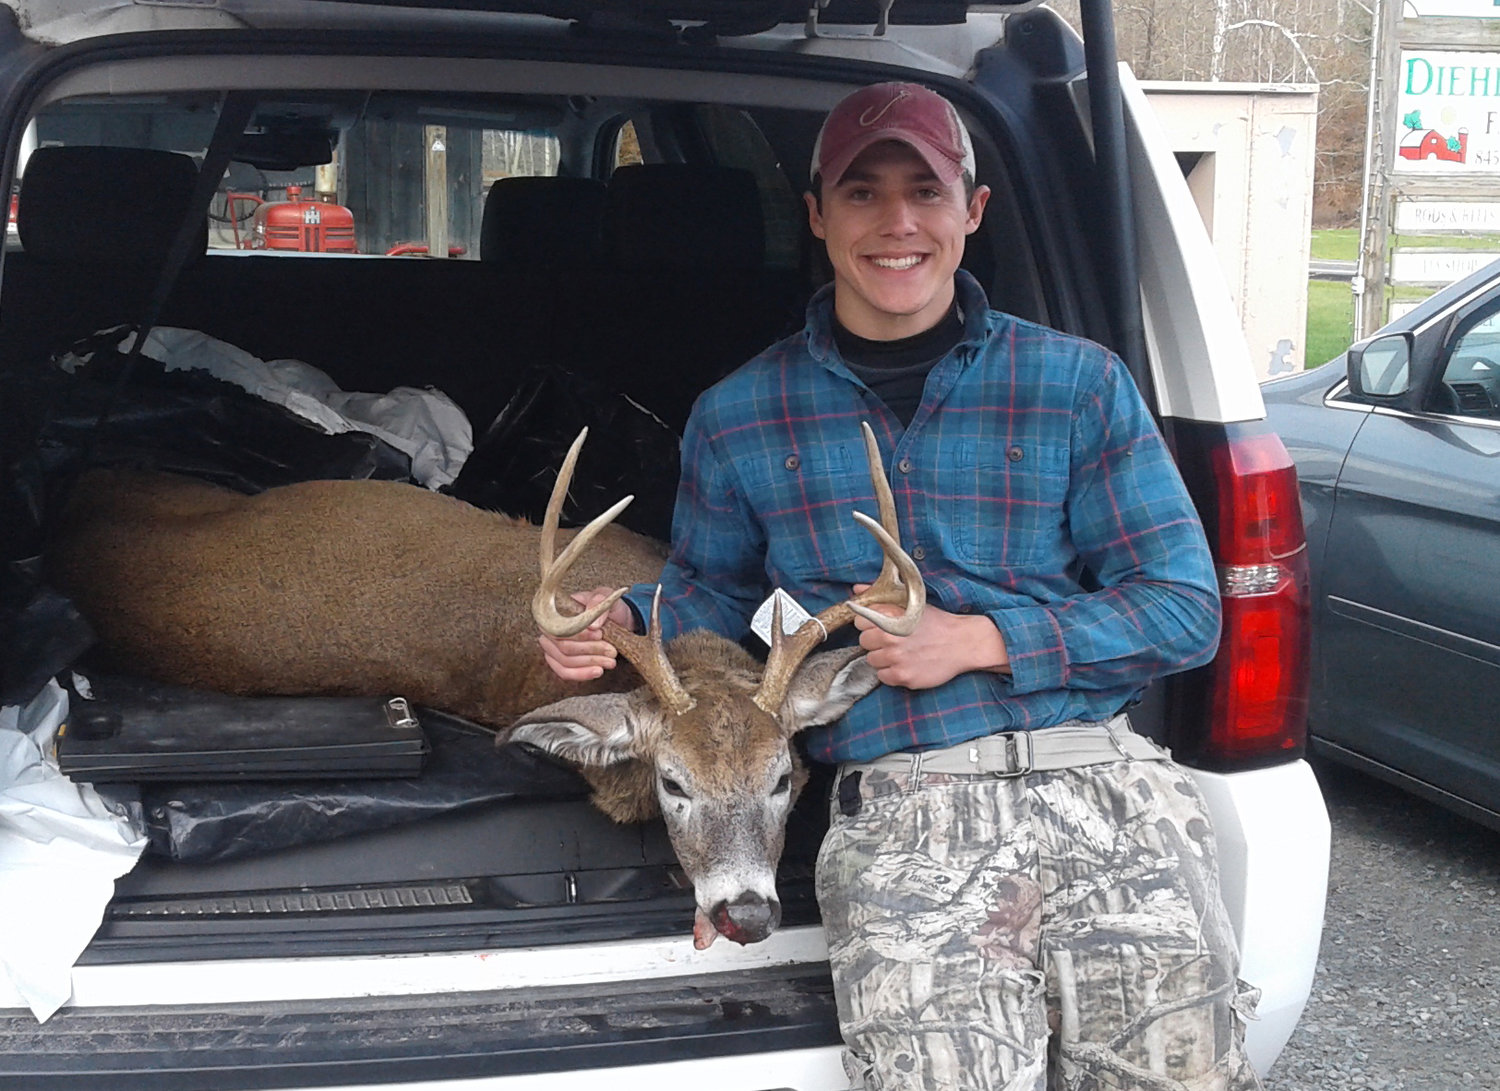 Henry Peters bagged this nice 8-pointer on opening day in the Town of Fremont. It scored 63.25 in the Big Buck Contest.